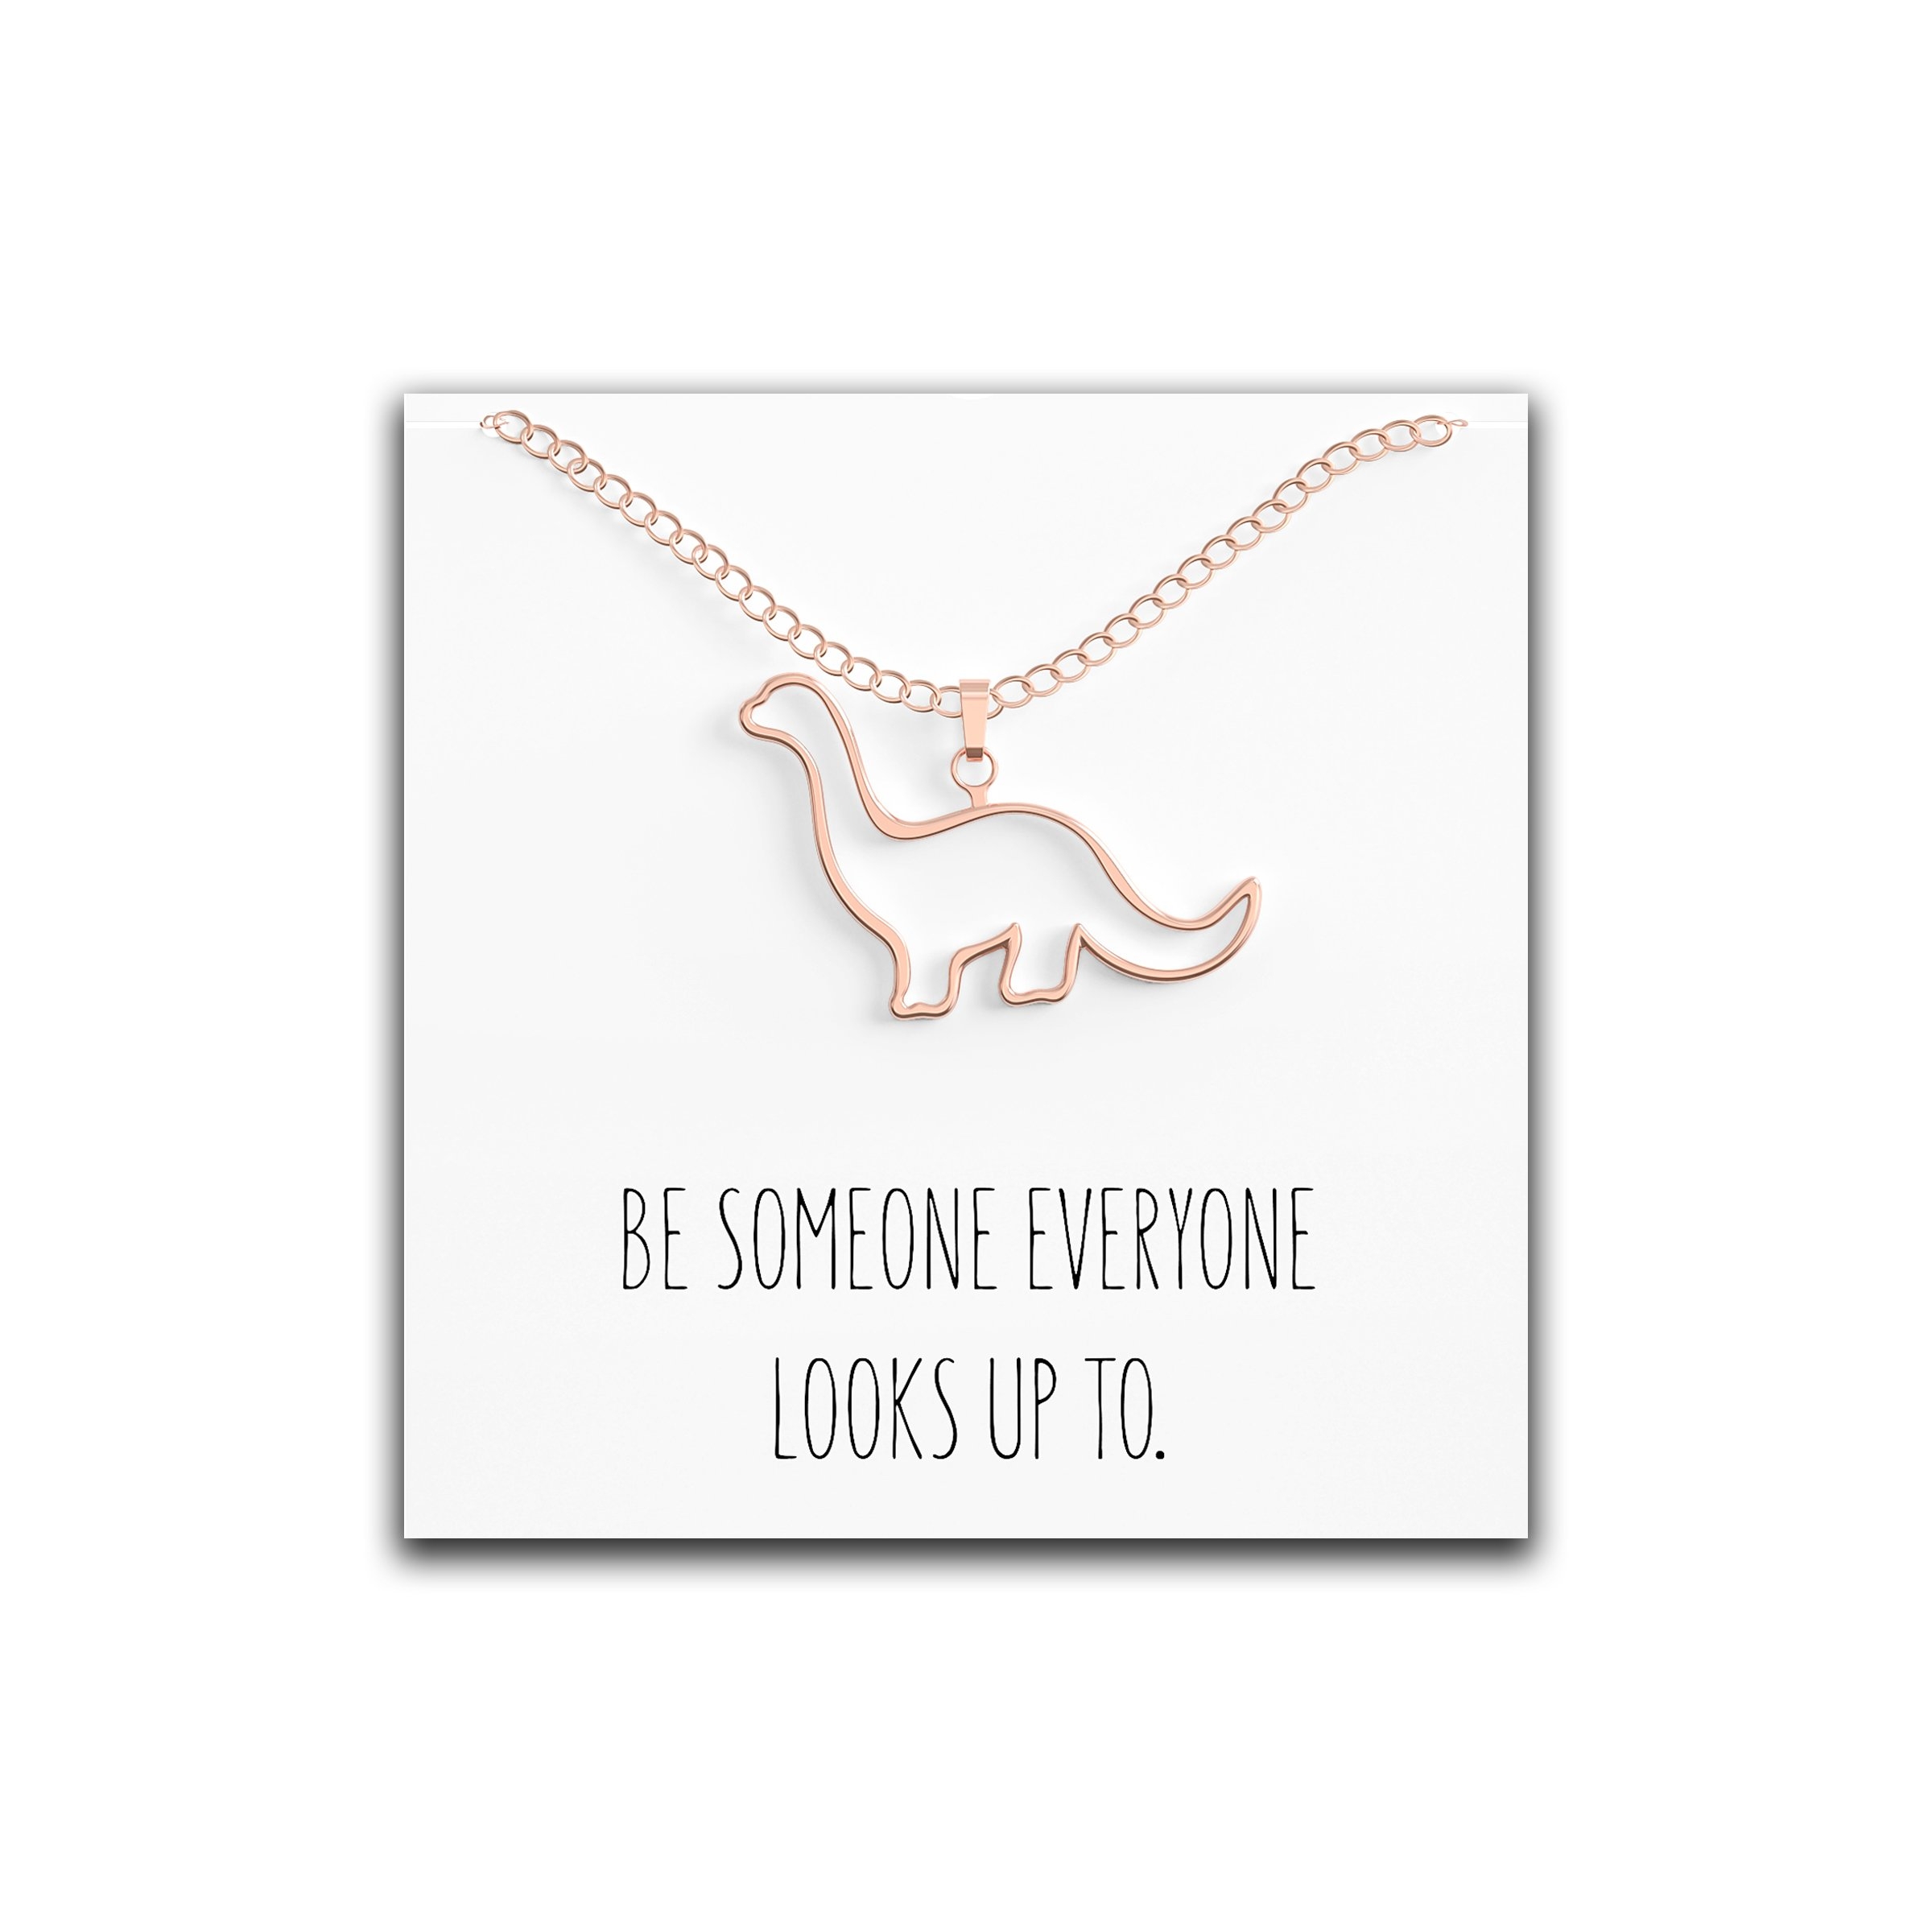 Dinosaur Brontosaurus Necklace – Cute Pendant Gift – Sweet & Funny Message Card Rose Gold – Happy Kisses